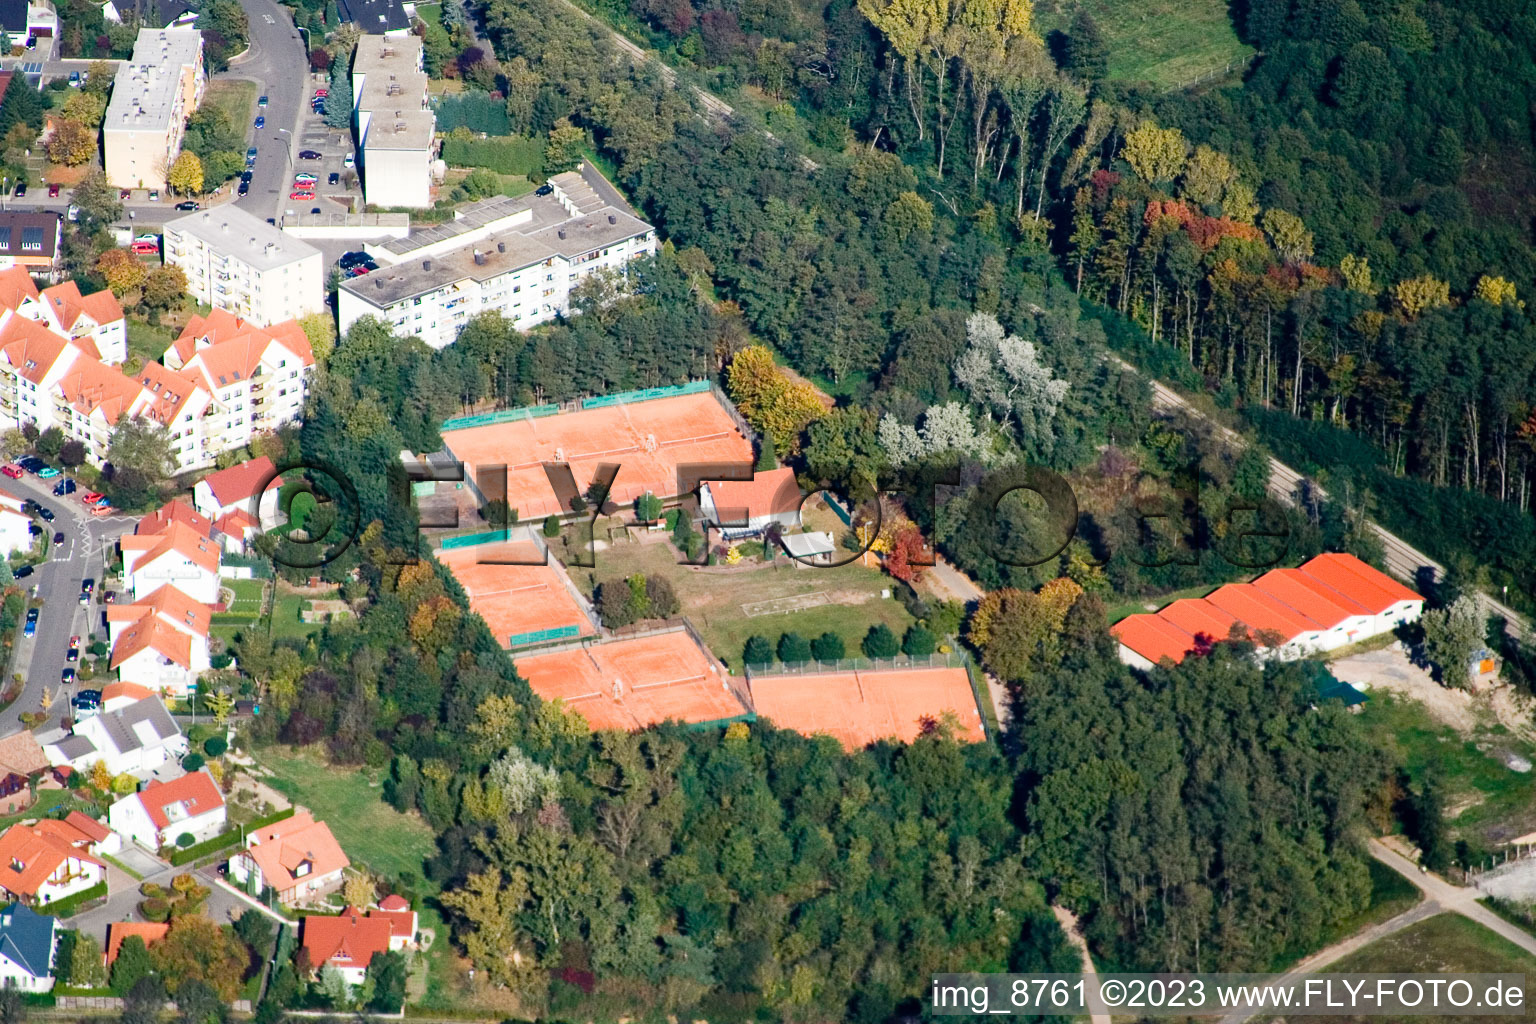 Tennis club in Jockgrim in the state Rhineland-Palatinate, Germany out of the air